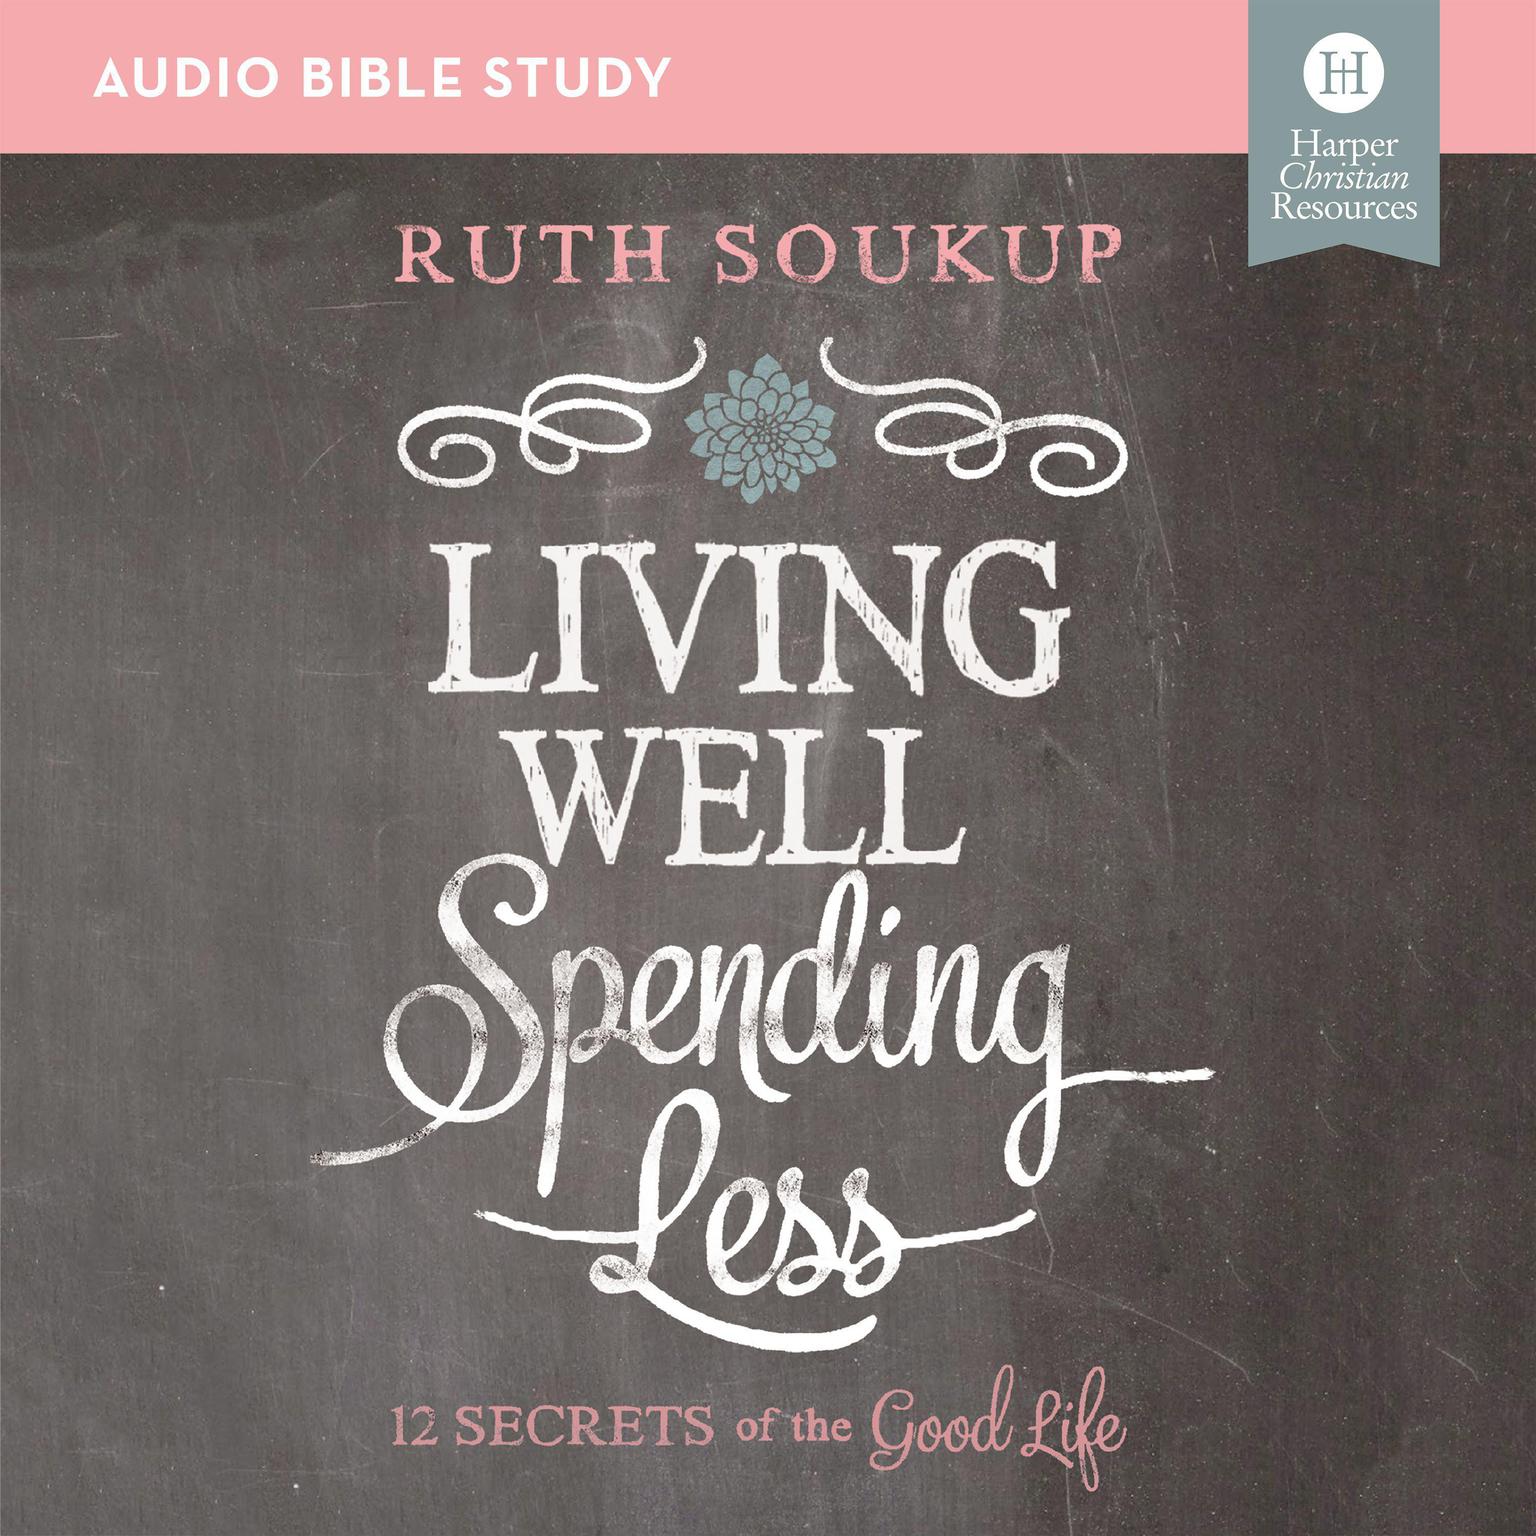 Living Well, Spending Less: Audio Bible Studies: 12 Secrets of the Good Life Audiobook, by Ruth Soukup